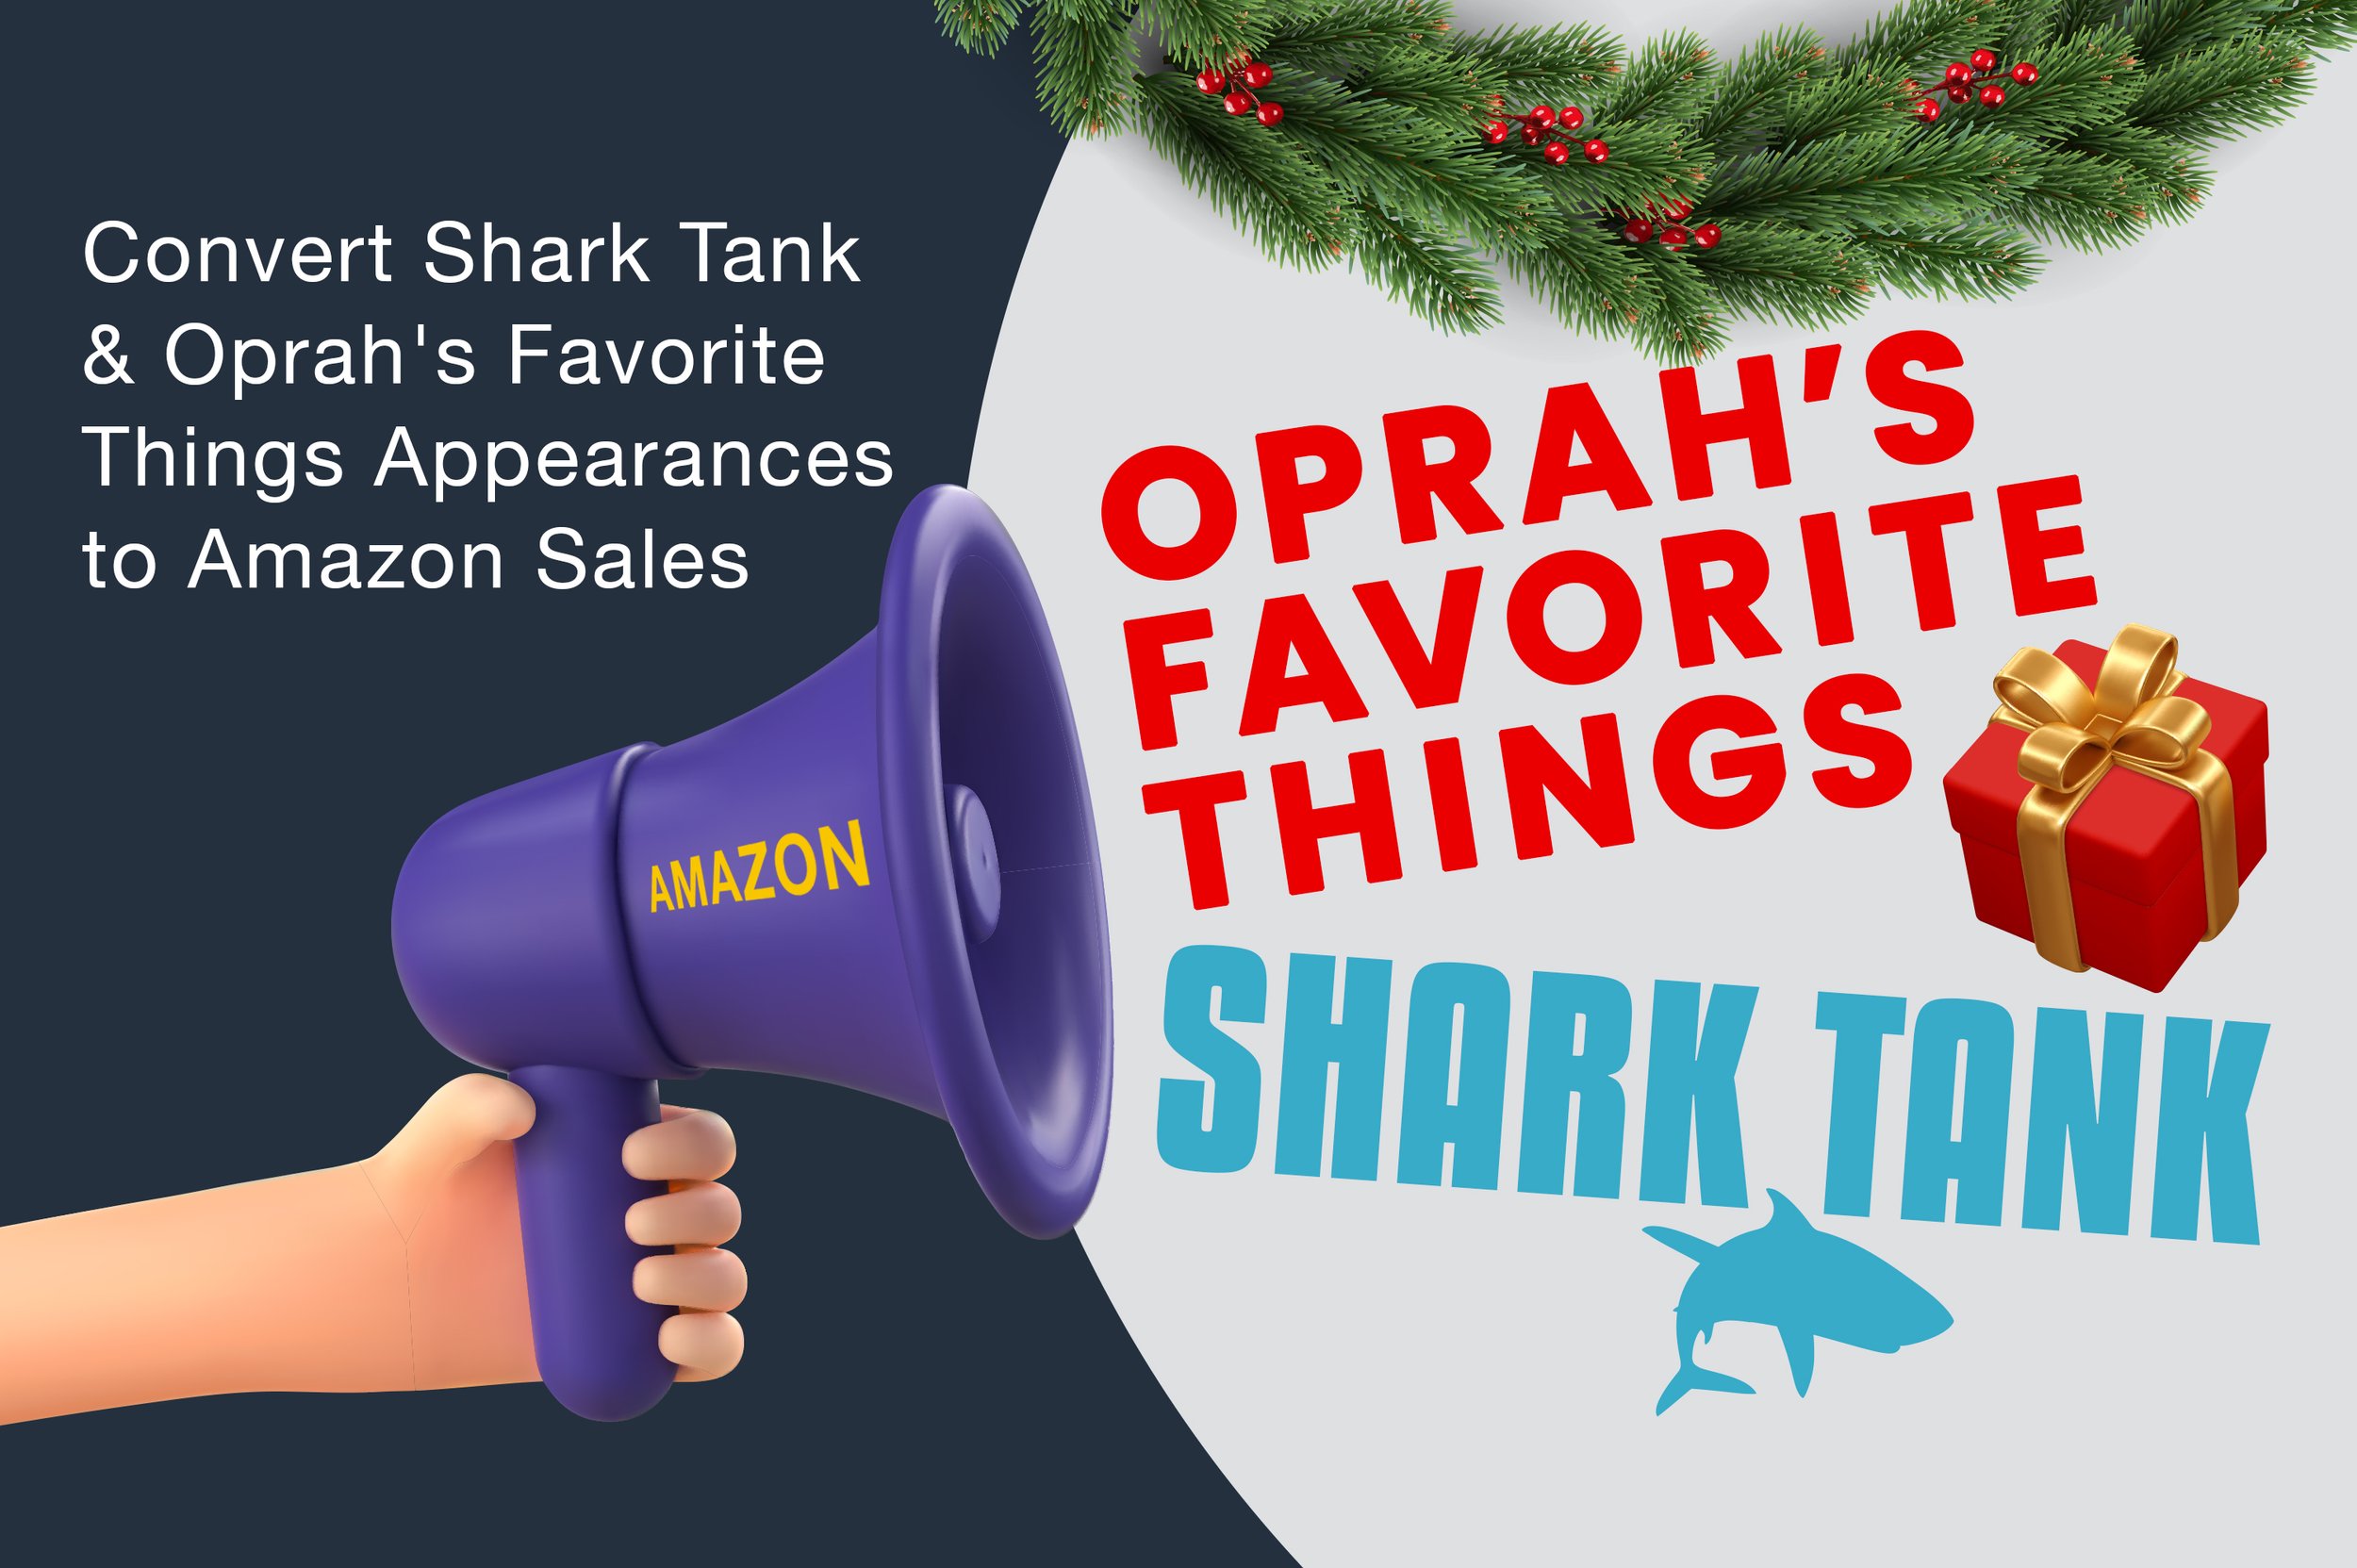 Convert Shark Tank or Oprah's Favorite Things Appearance into